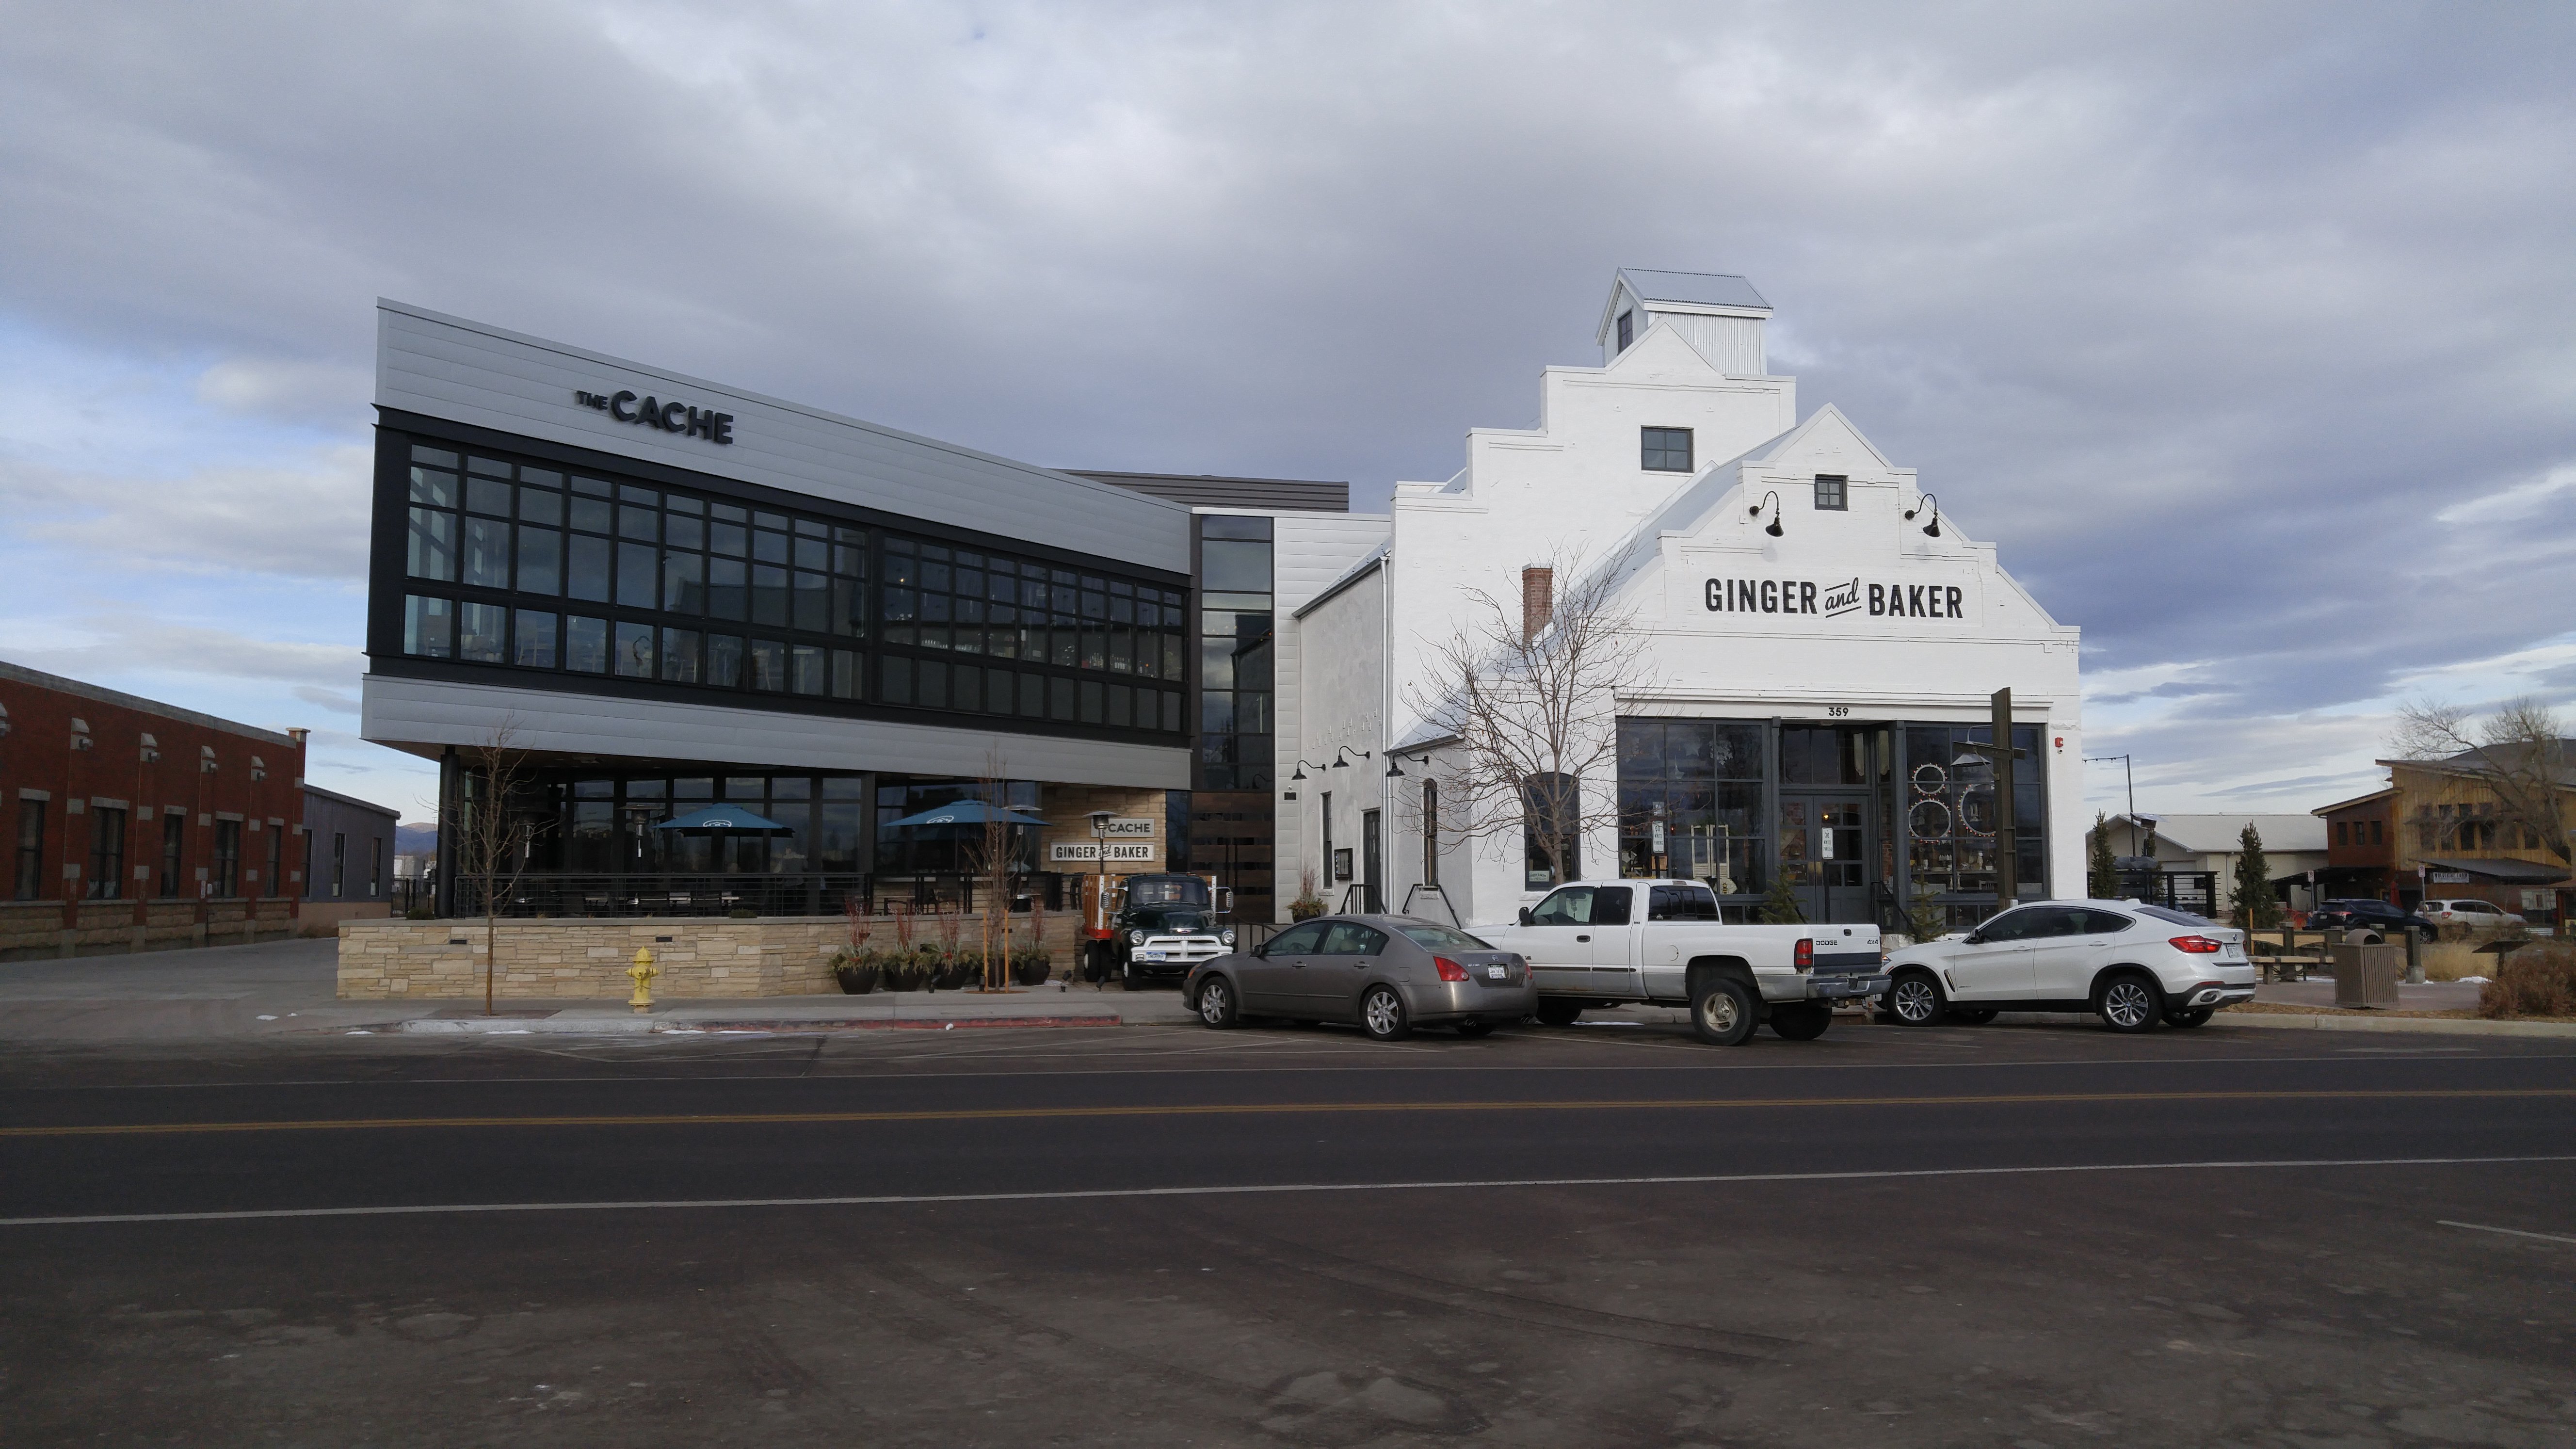 The Ginger and Baker store in Ft. Collins, a white historic building with a glass addition.